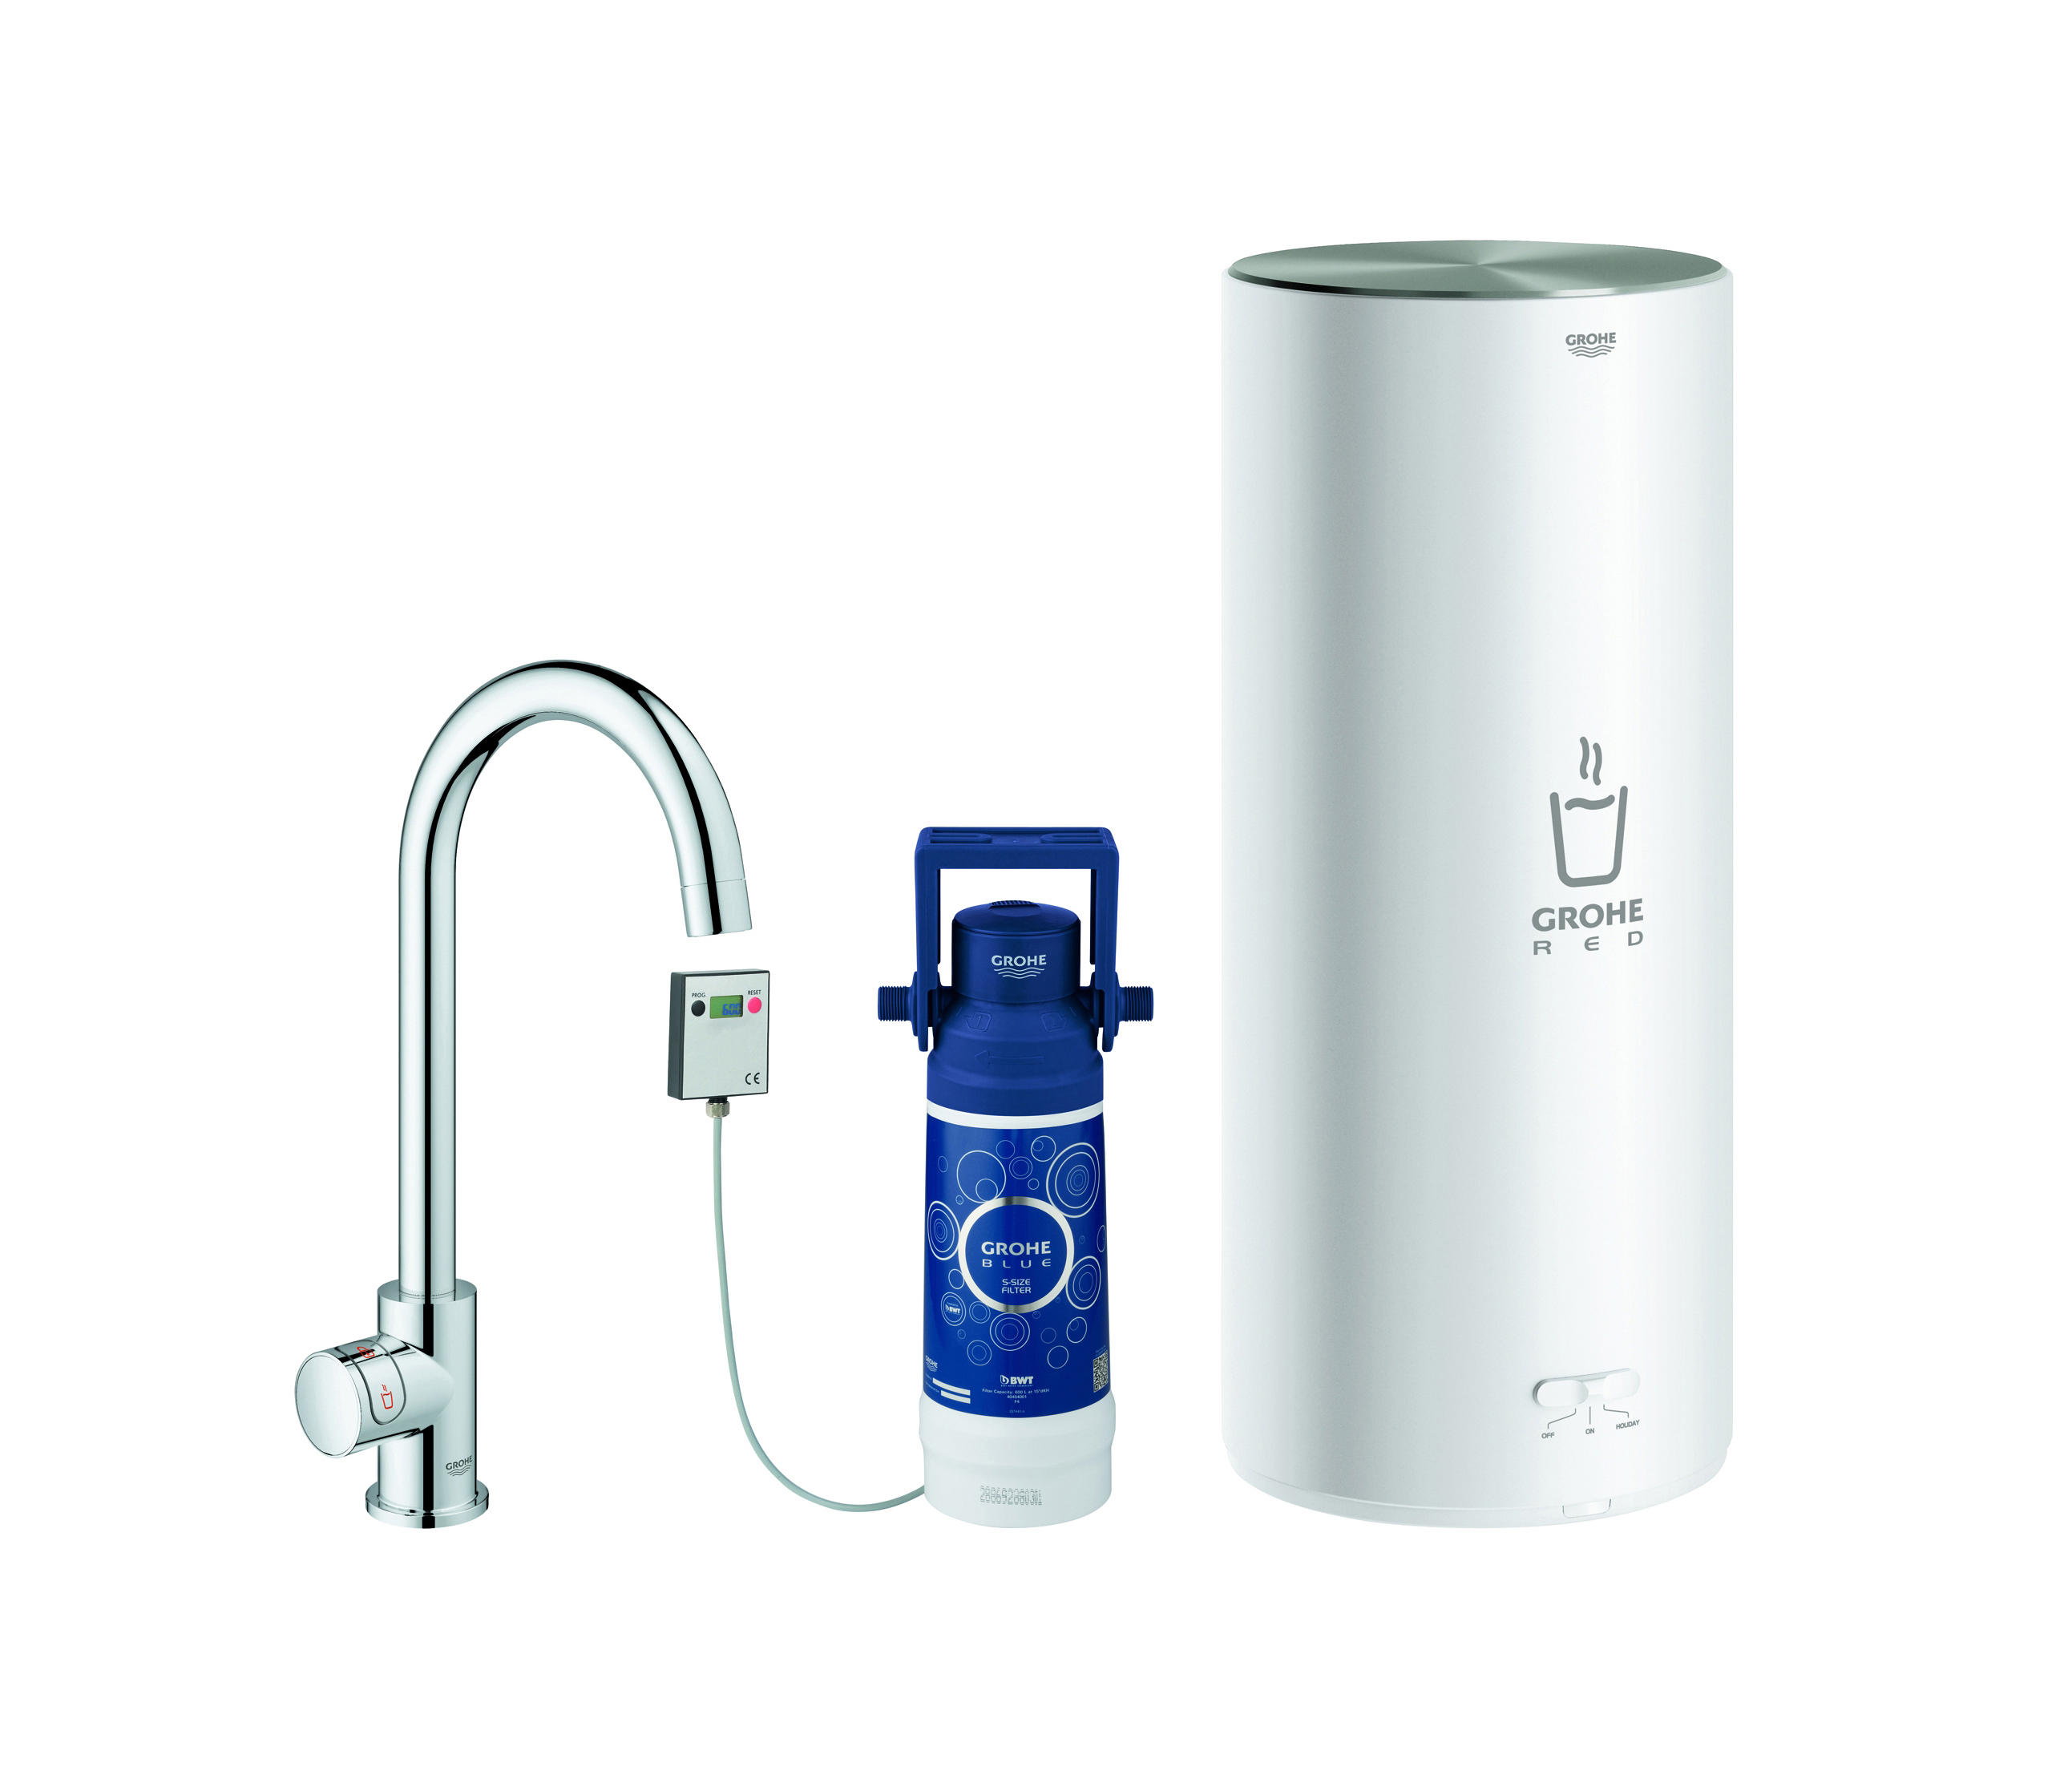 GROHE Red tap and size boiler | Architonic